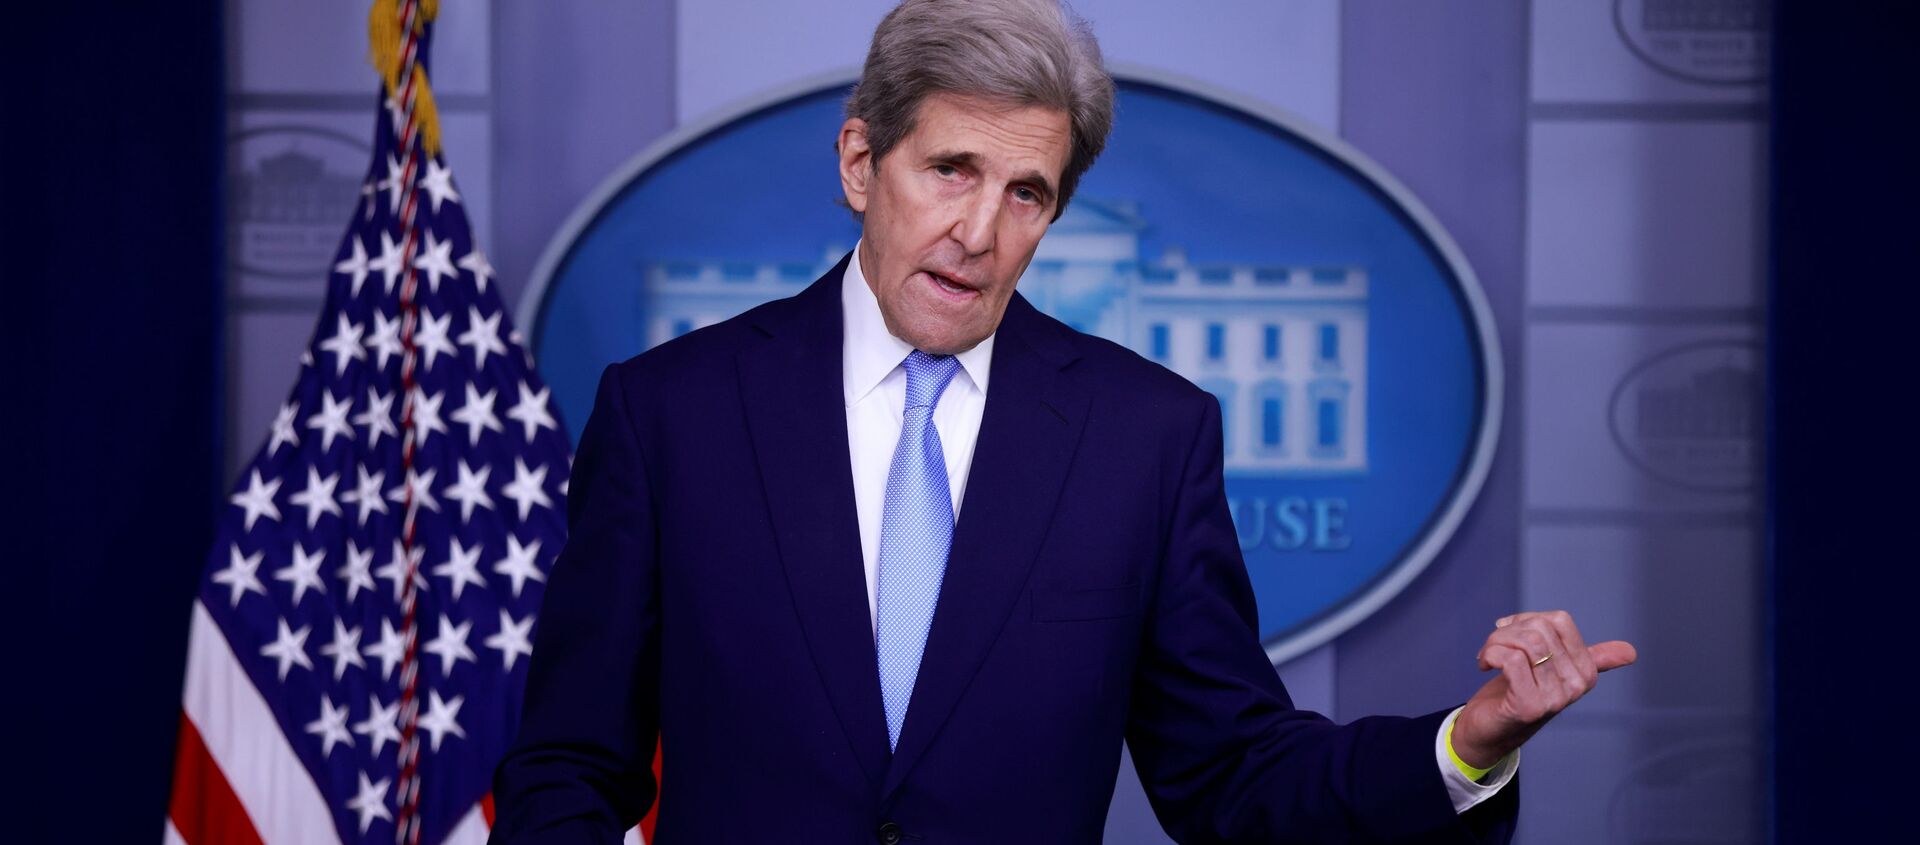 John Kerry, Special Presidential Envoy for Climate, delivers remarks during a press briefing at the White House in Washington, U.S., April 22, 2021. - Sputnik International, 1920, 26.04.2021